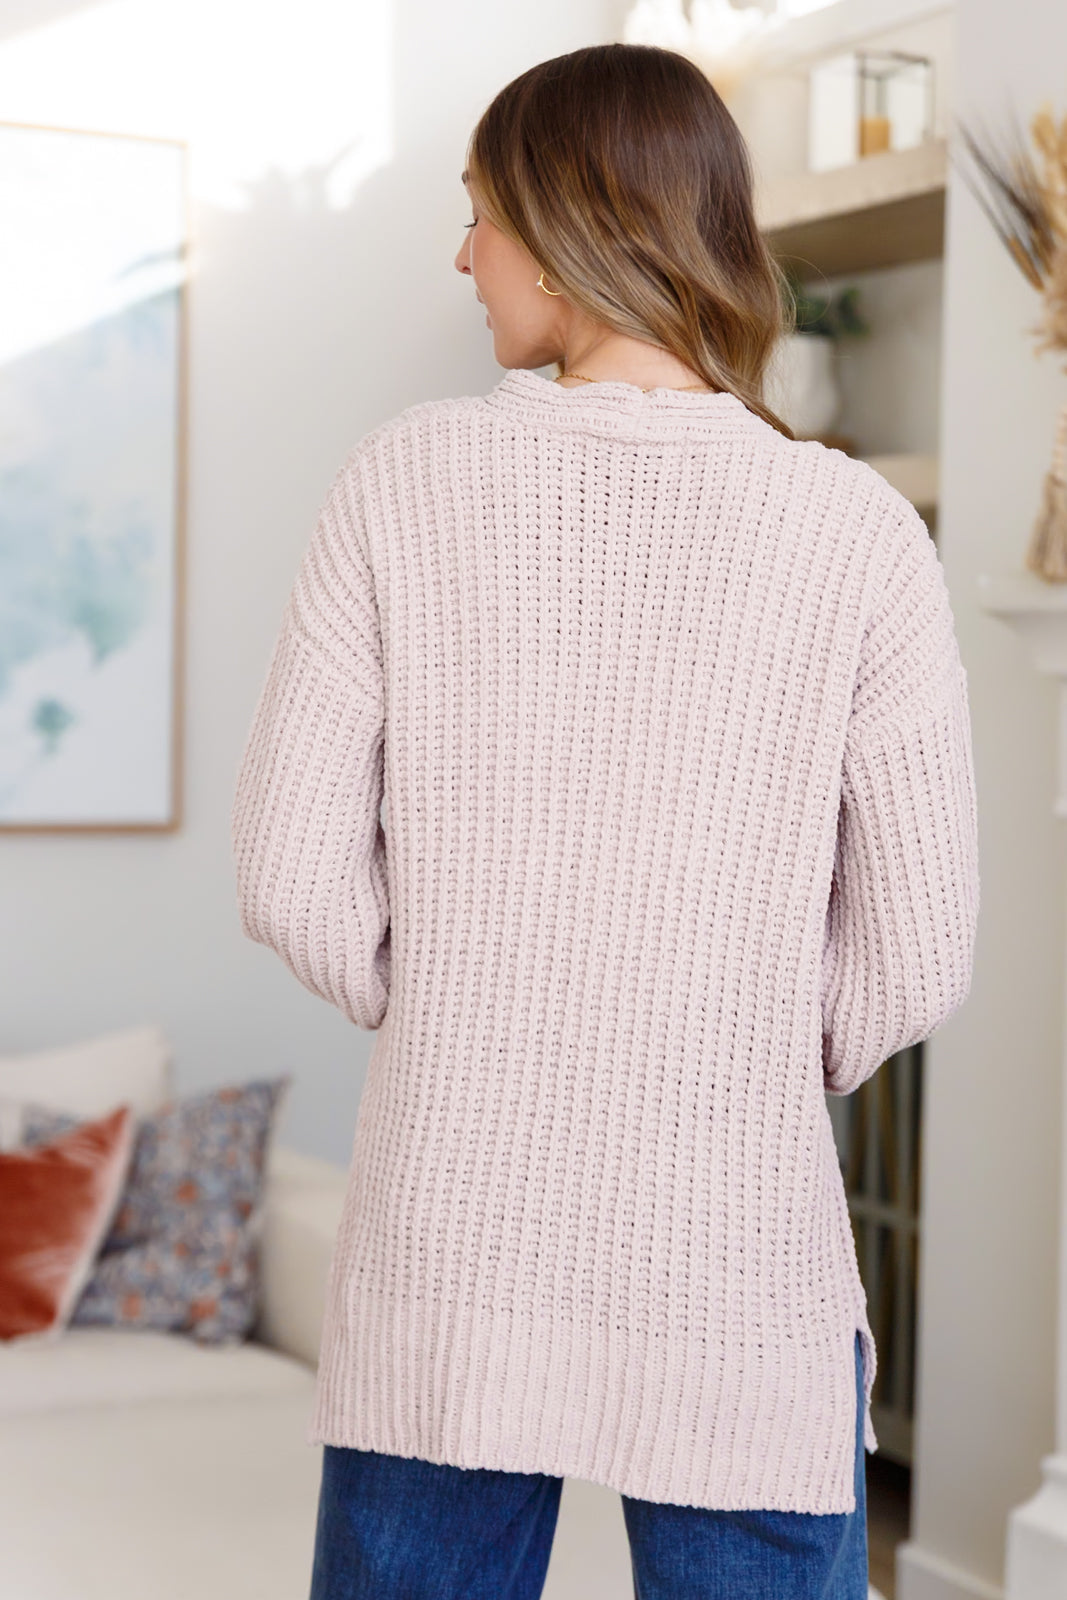 Layers - Mother Knows Best Buttoned Down Cardigan